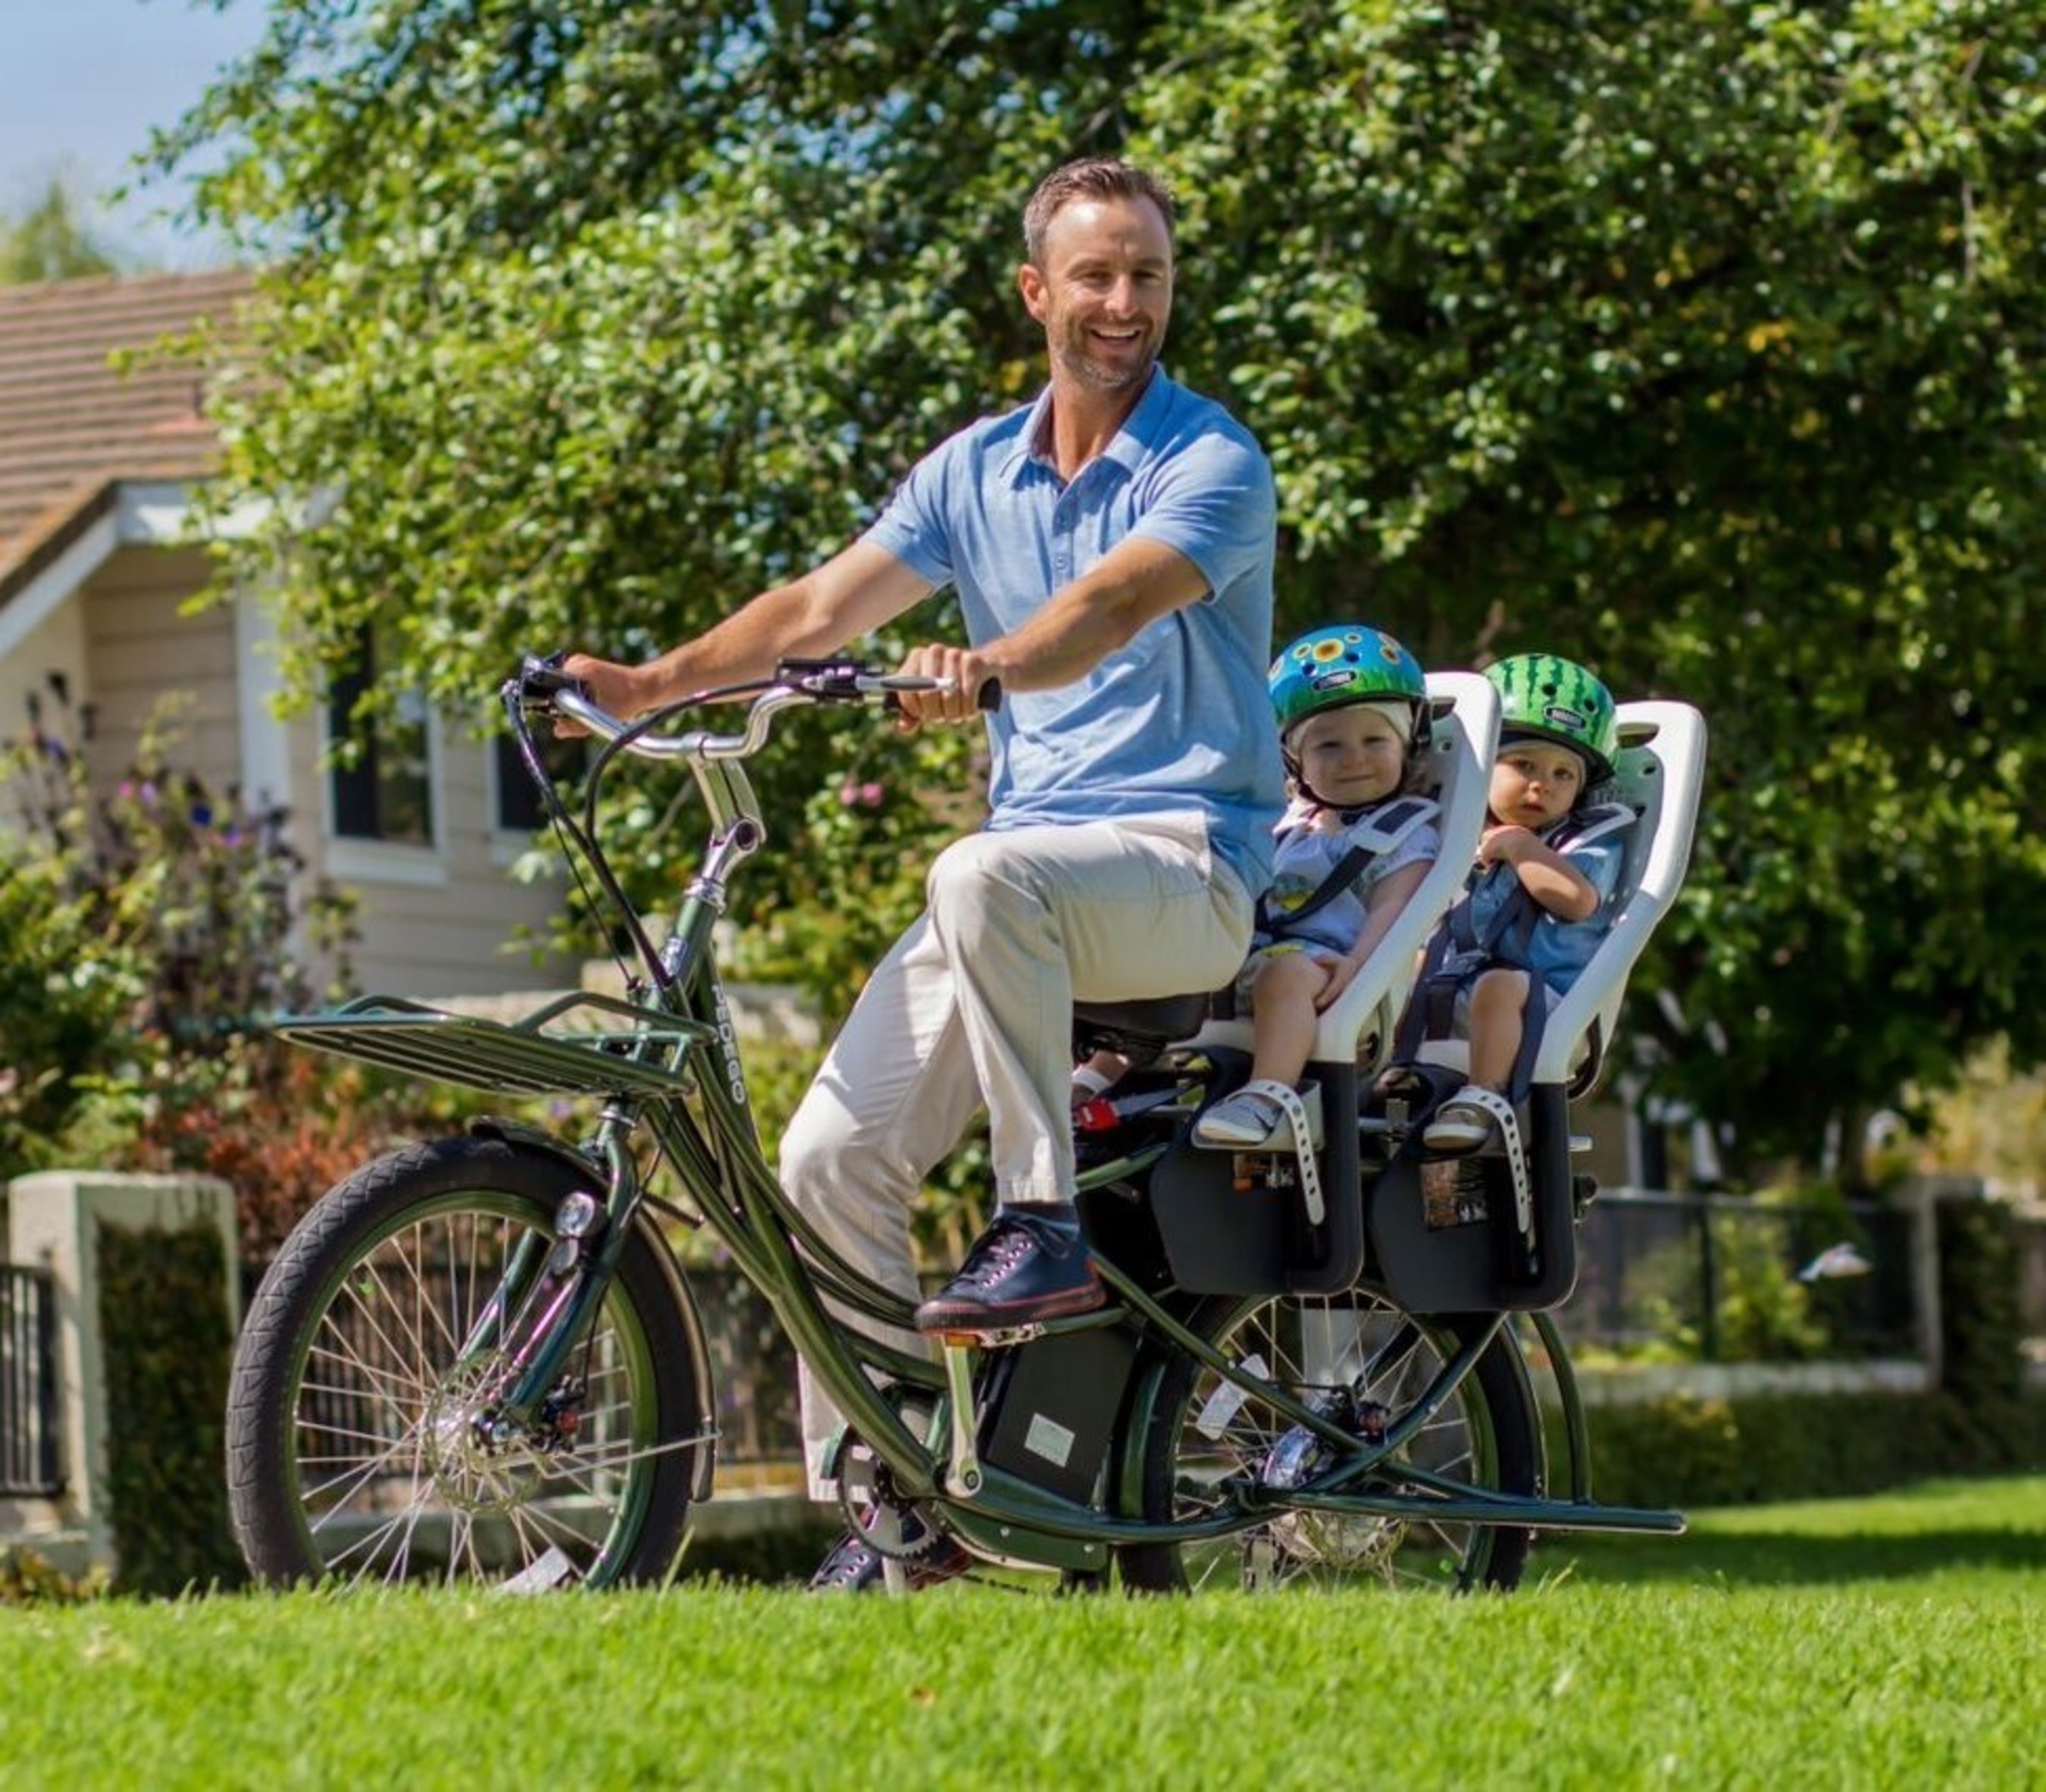 Pedego Introduces a Superhero Bike - the Stretch Cargo!  Carry heavy loads or even a second rider (or two!) on amazing new Pedego electric bicycle.